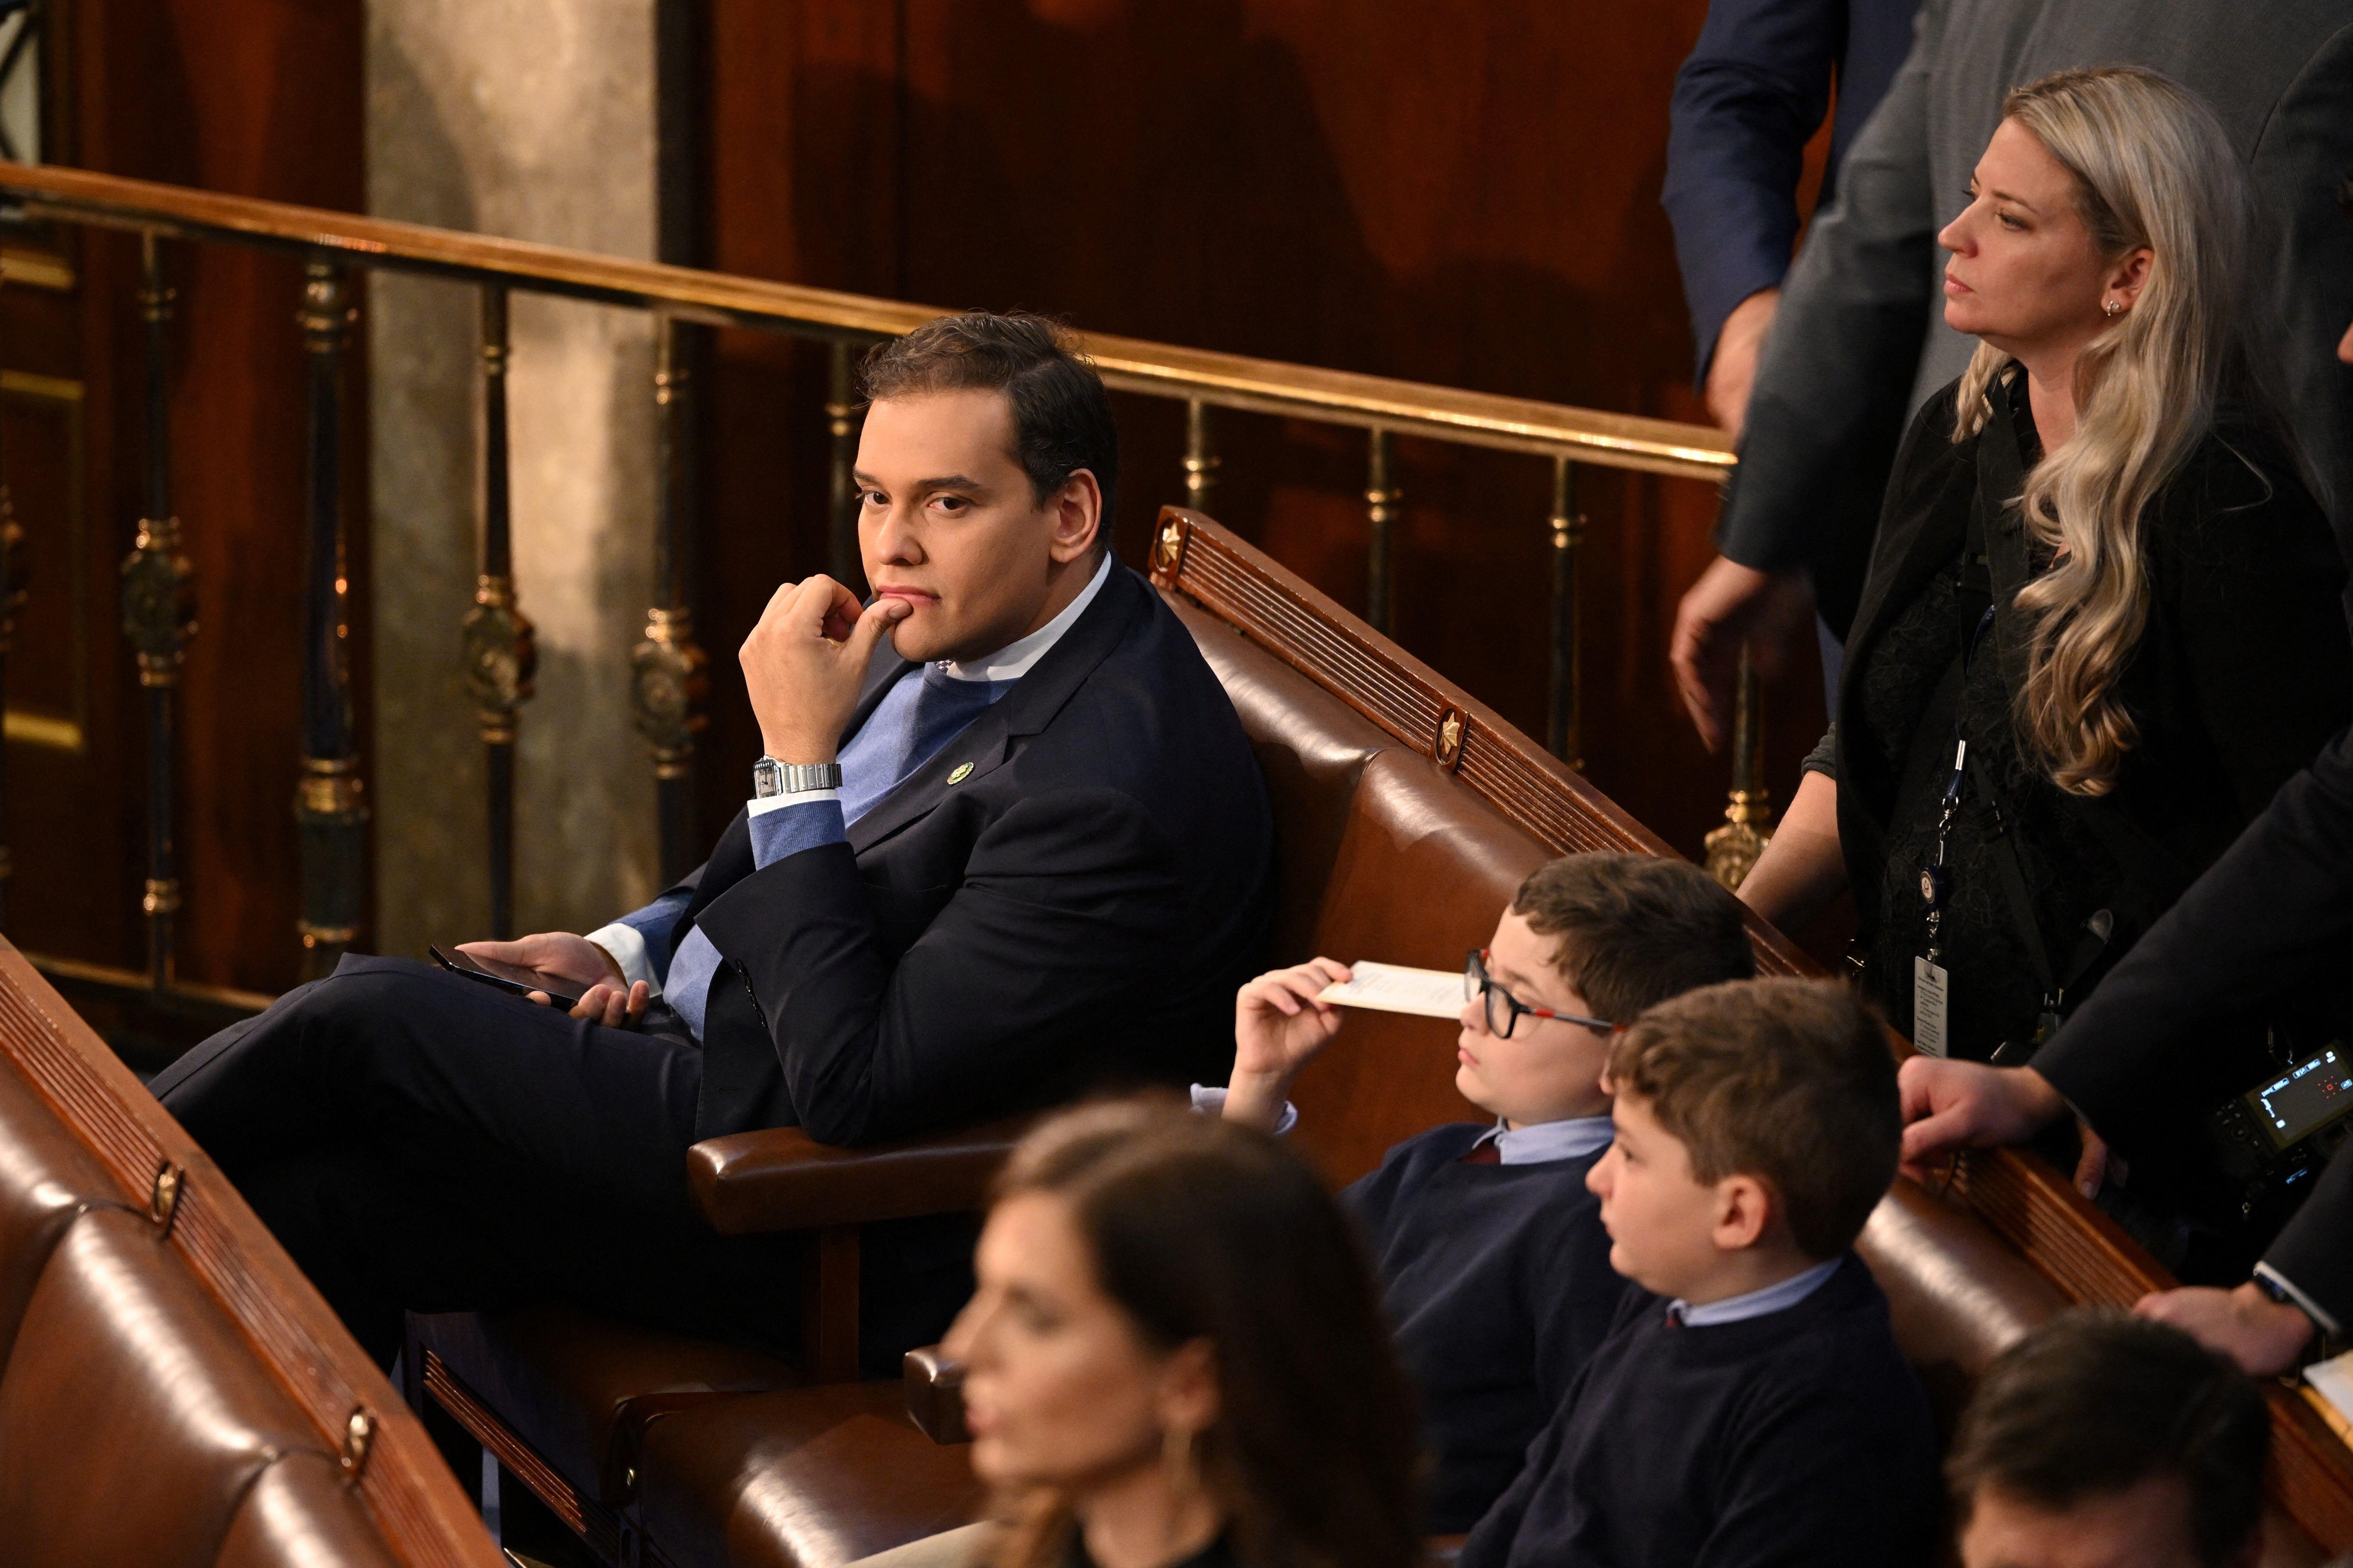 George Santos, an incoming House rep. from New York who lied about nearly every aspect of his background and biography, looking around, nestled between empty seats in Congress.